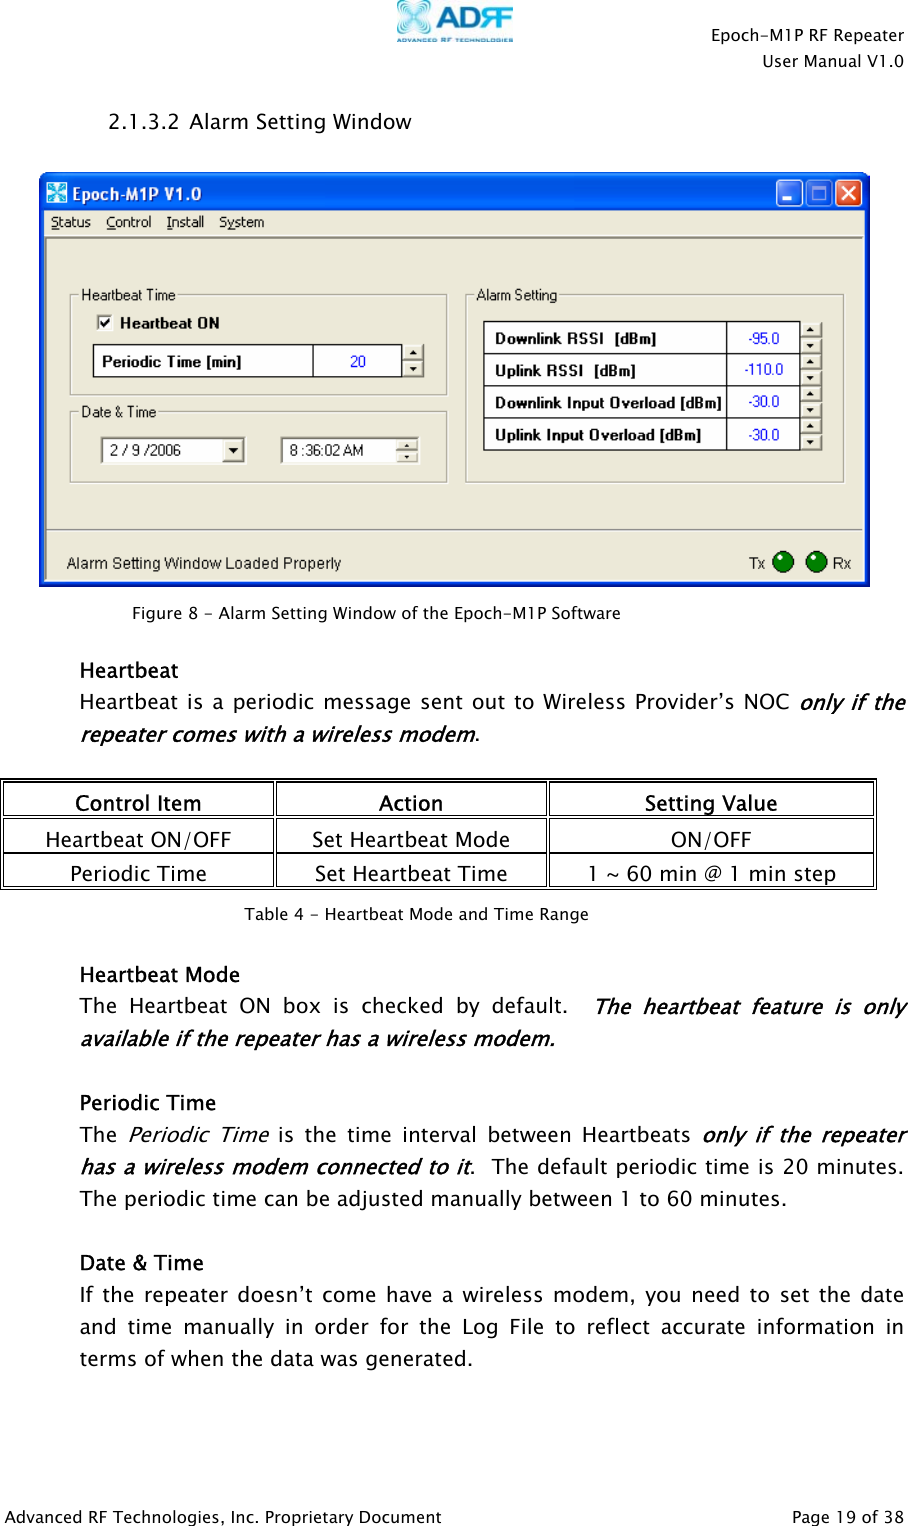    Epoch-M1P RF Repeater  User Manual V1.0  2.1.3.2  Alarm Setting Window    Figure 8 - Alarm Setting Window of the Epoch-M1P Software  Heartbeat Heartbeat is a periodic message sent out to Wireless Provider’s NOC only if the repeater comes with a wireless modem.  Control Item  Action  Setting Value Heartbeat ON/OFF  Set Heartbeat Mode  ON/OFF Periodic Time  Set Heartbeat Time  1 ~ 60 min @ 1 min step  Table 4 - Heartbeat Mode and Time Range   Heartbeat Mode The Heartbeat ON box is checked by default.  The heartbeat feature is only available if the repeater has a wireless modem.   Periodic Time The Periodi  Time is the time interval between Heartbeats only if the repeater has a wireless modem connected to it.  The default periodic time is 20 minutes.  The periodic time can be adjusted manually between 1 to 60 minutes. c Date &amp; Time If the repeater doesn’t come have a wireless modem, you need to set the date and time manually in order for the Log File to reflect accurate information in terms of when the data was generated.  Advanced RF Technologies, Inc. Proprietary Document   Page 19 of 38  